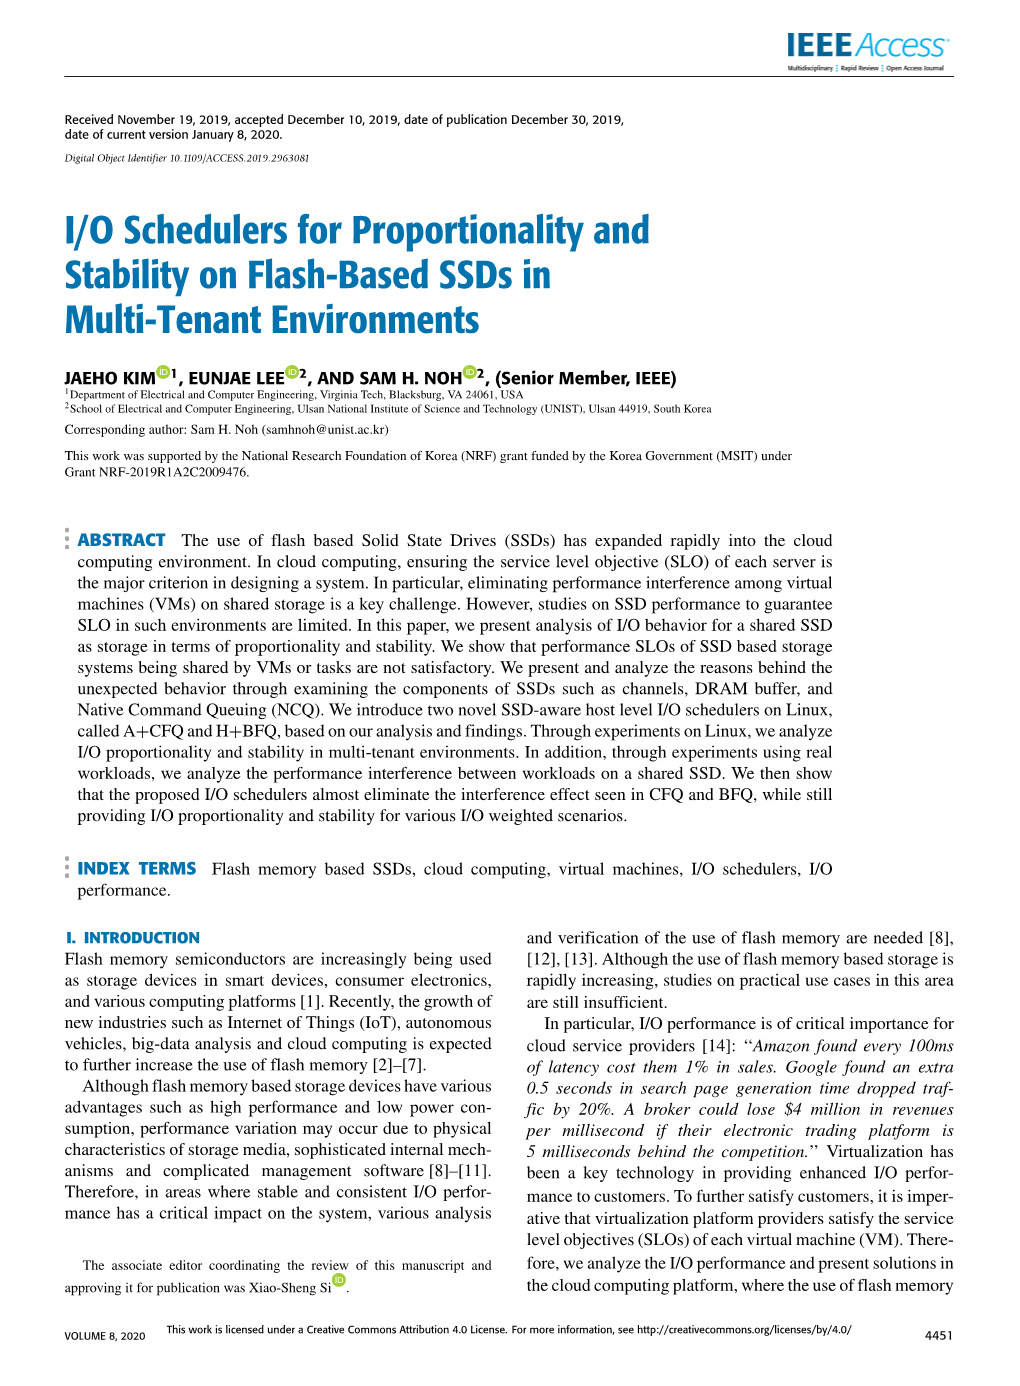 I/O Schedulers for Proportionality and Stability on Flash-Based Ssds in Multi-Tenant Environments